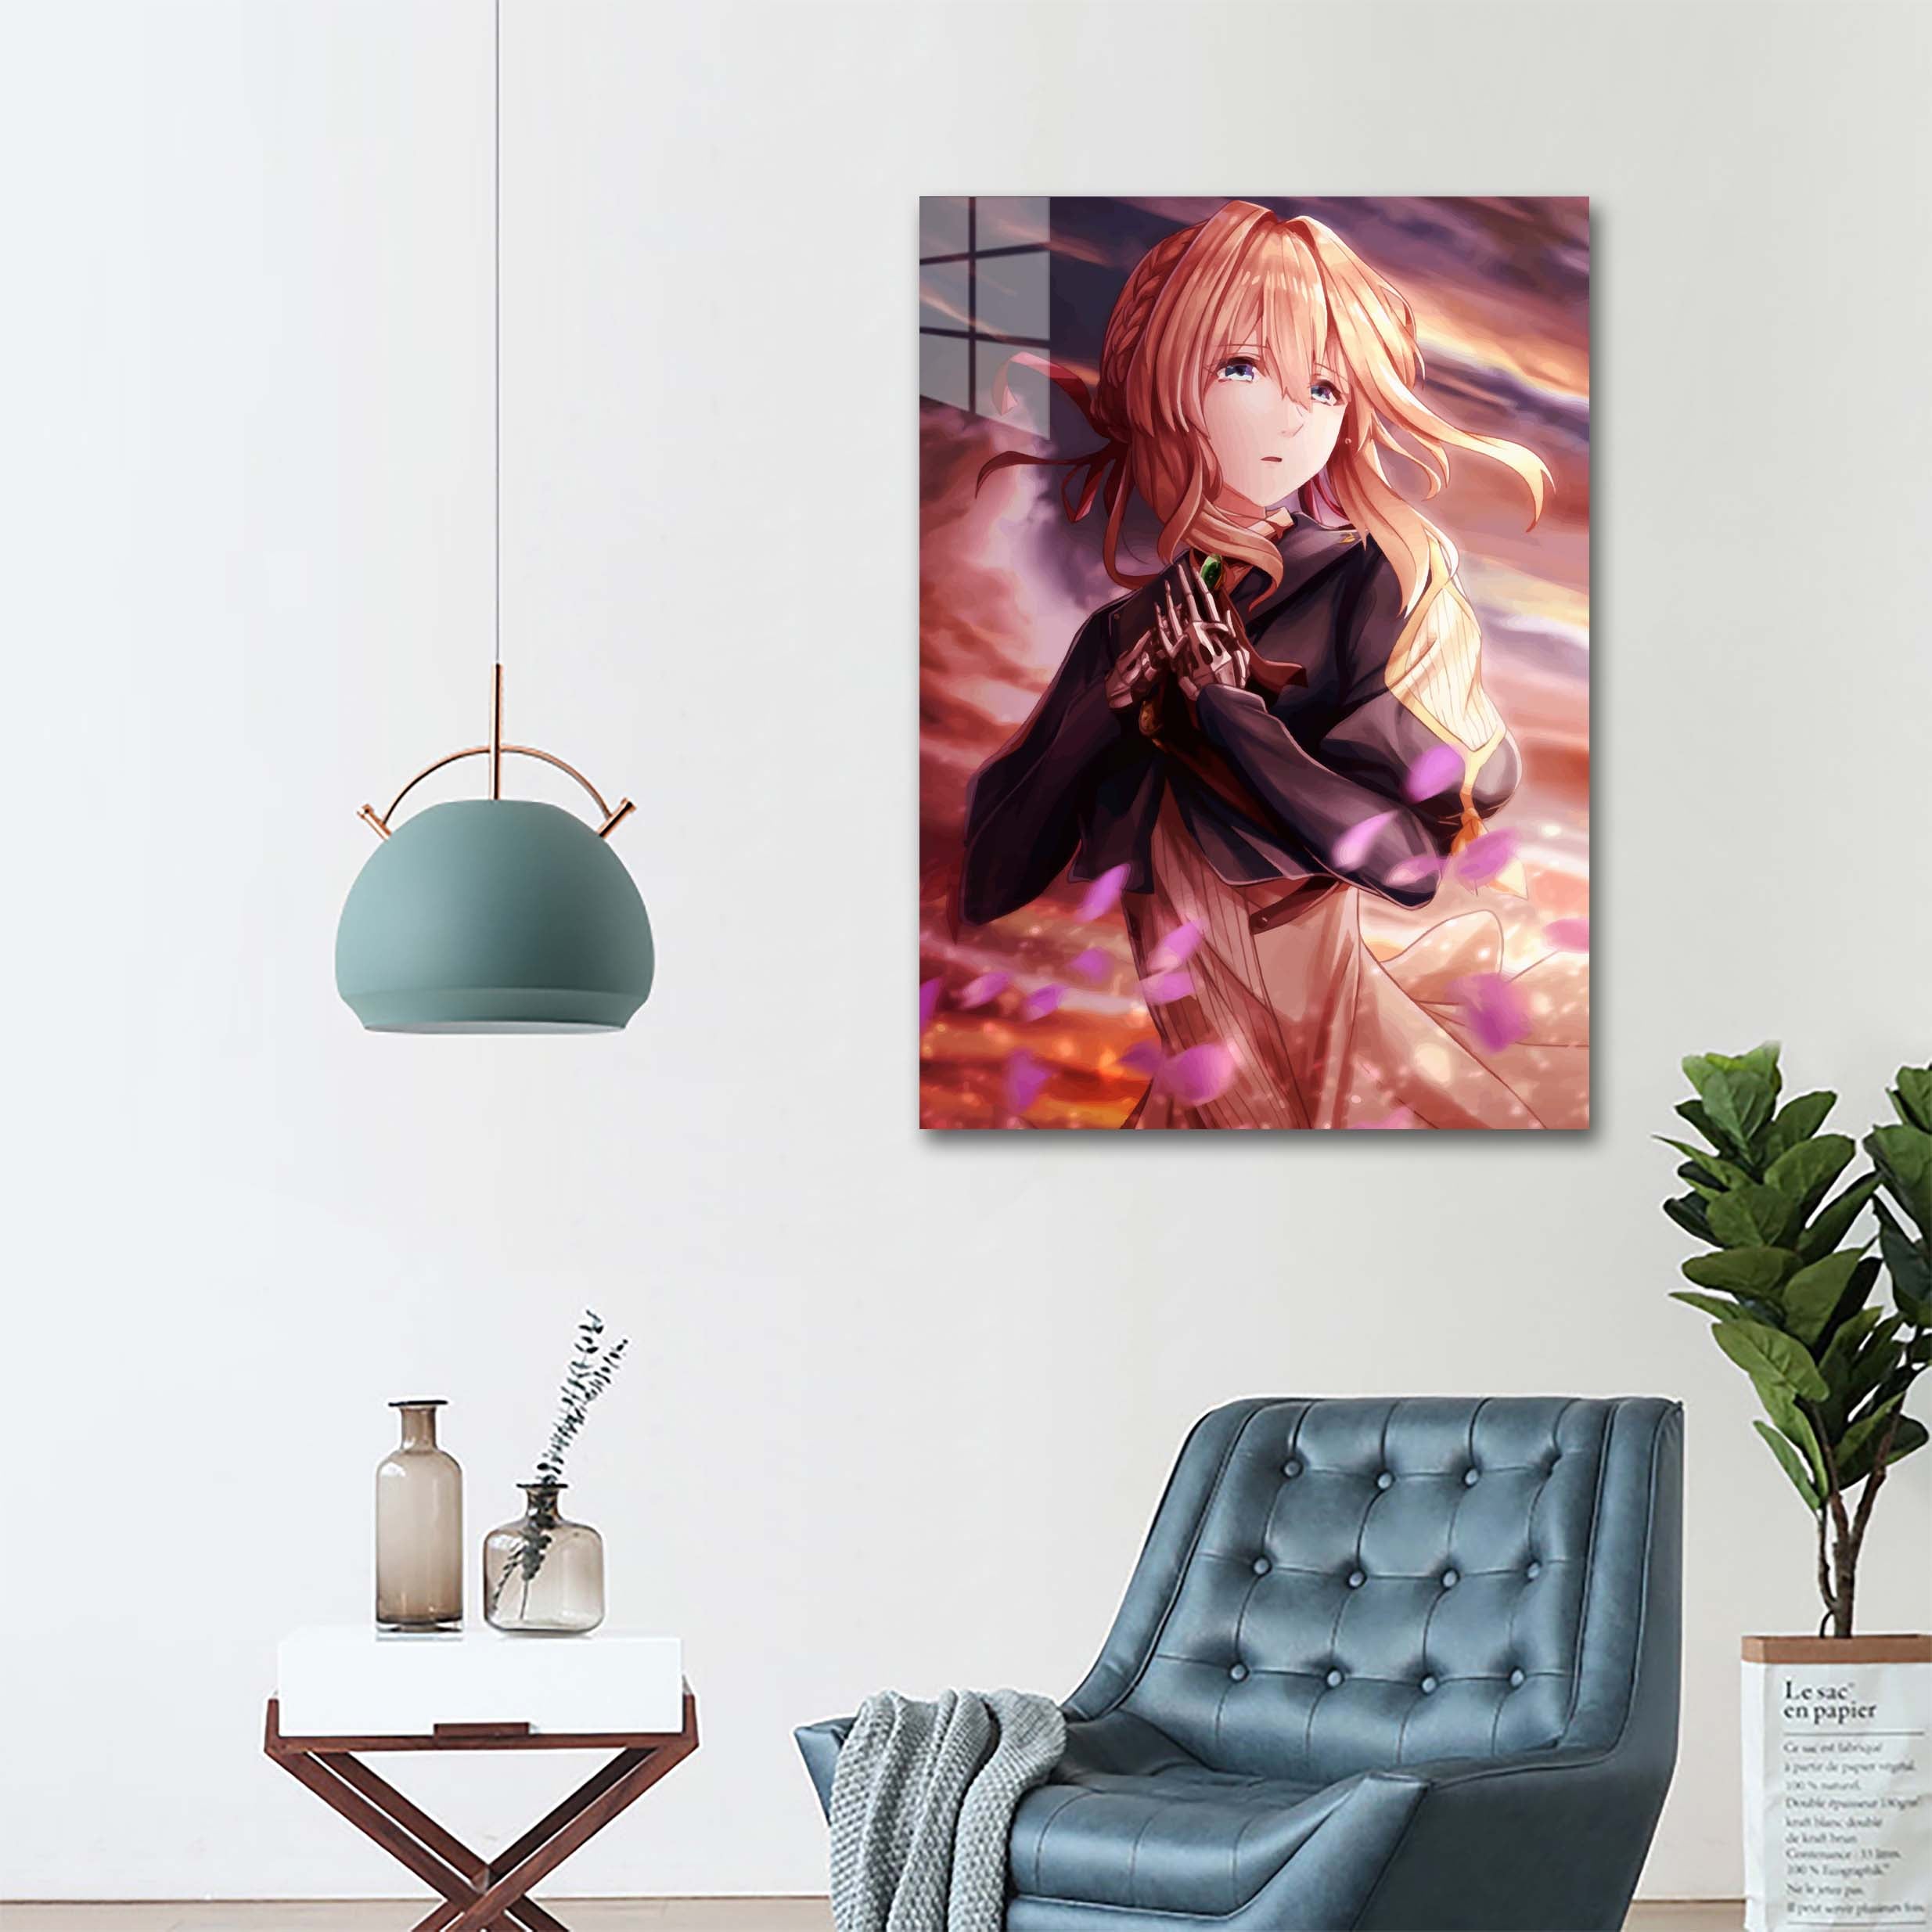 Violet Evergarden-designed by @Ma Chan